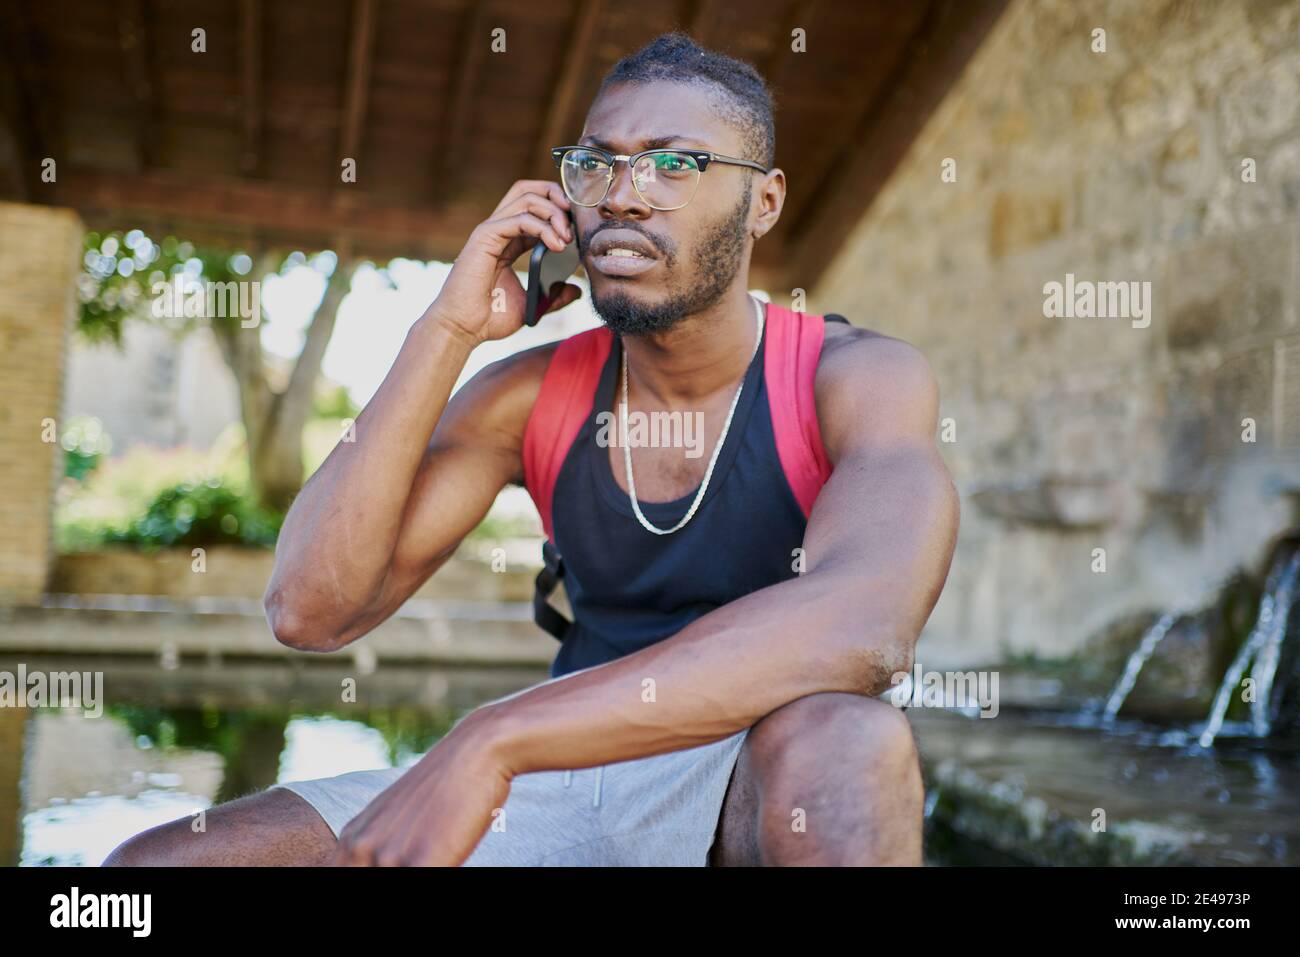 Young man on phone call outdoors Stock Photo